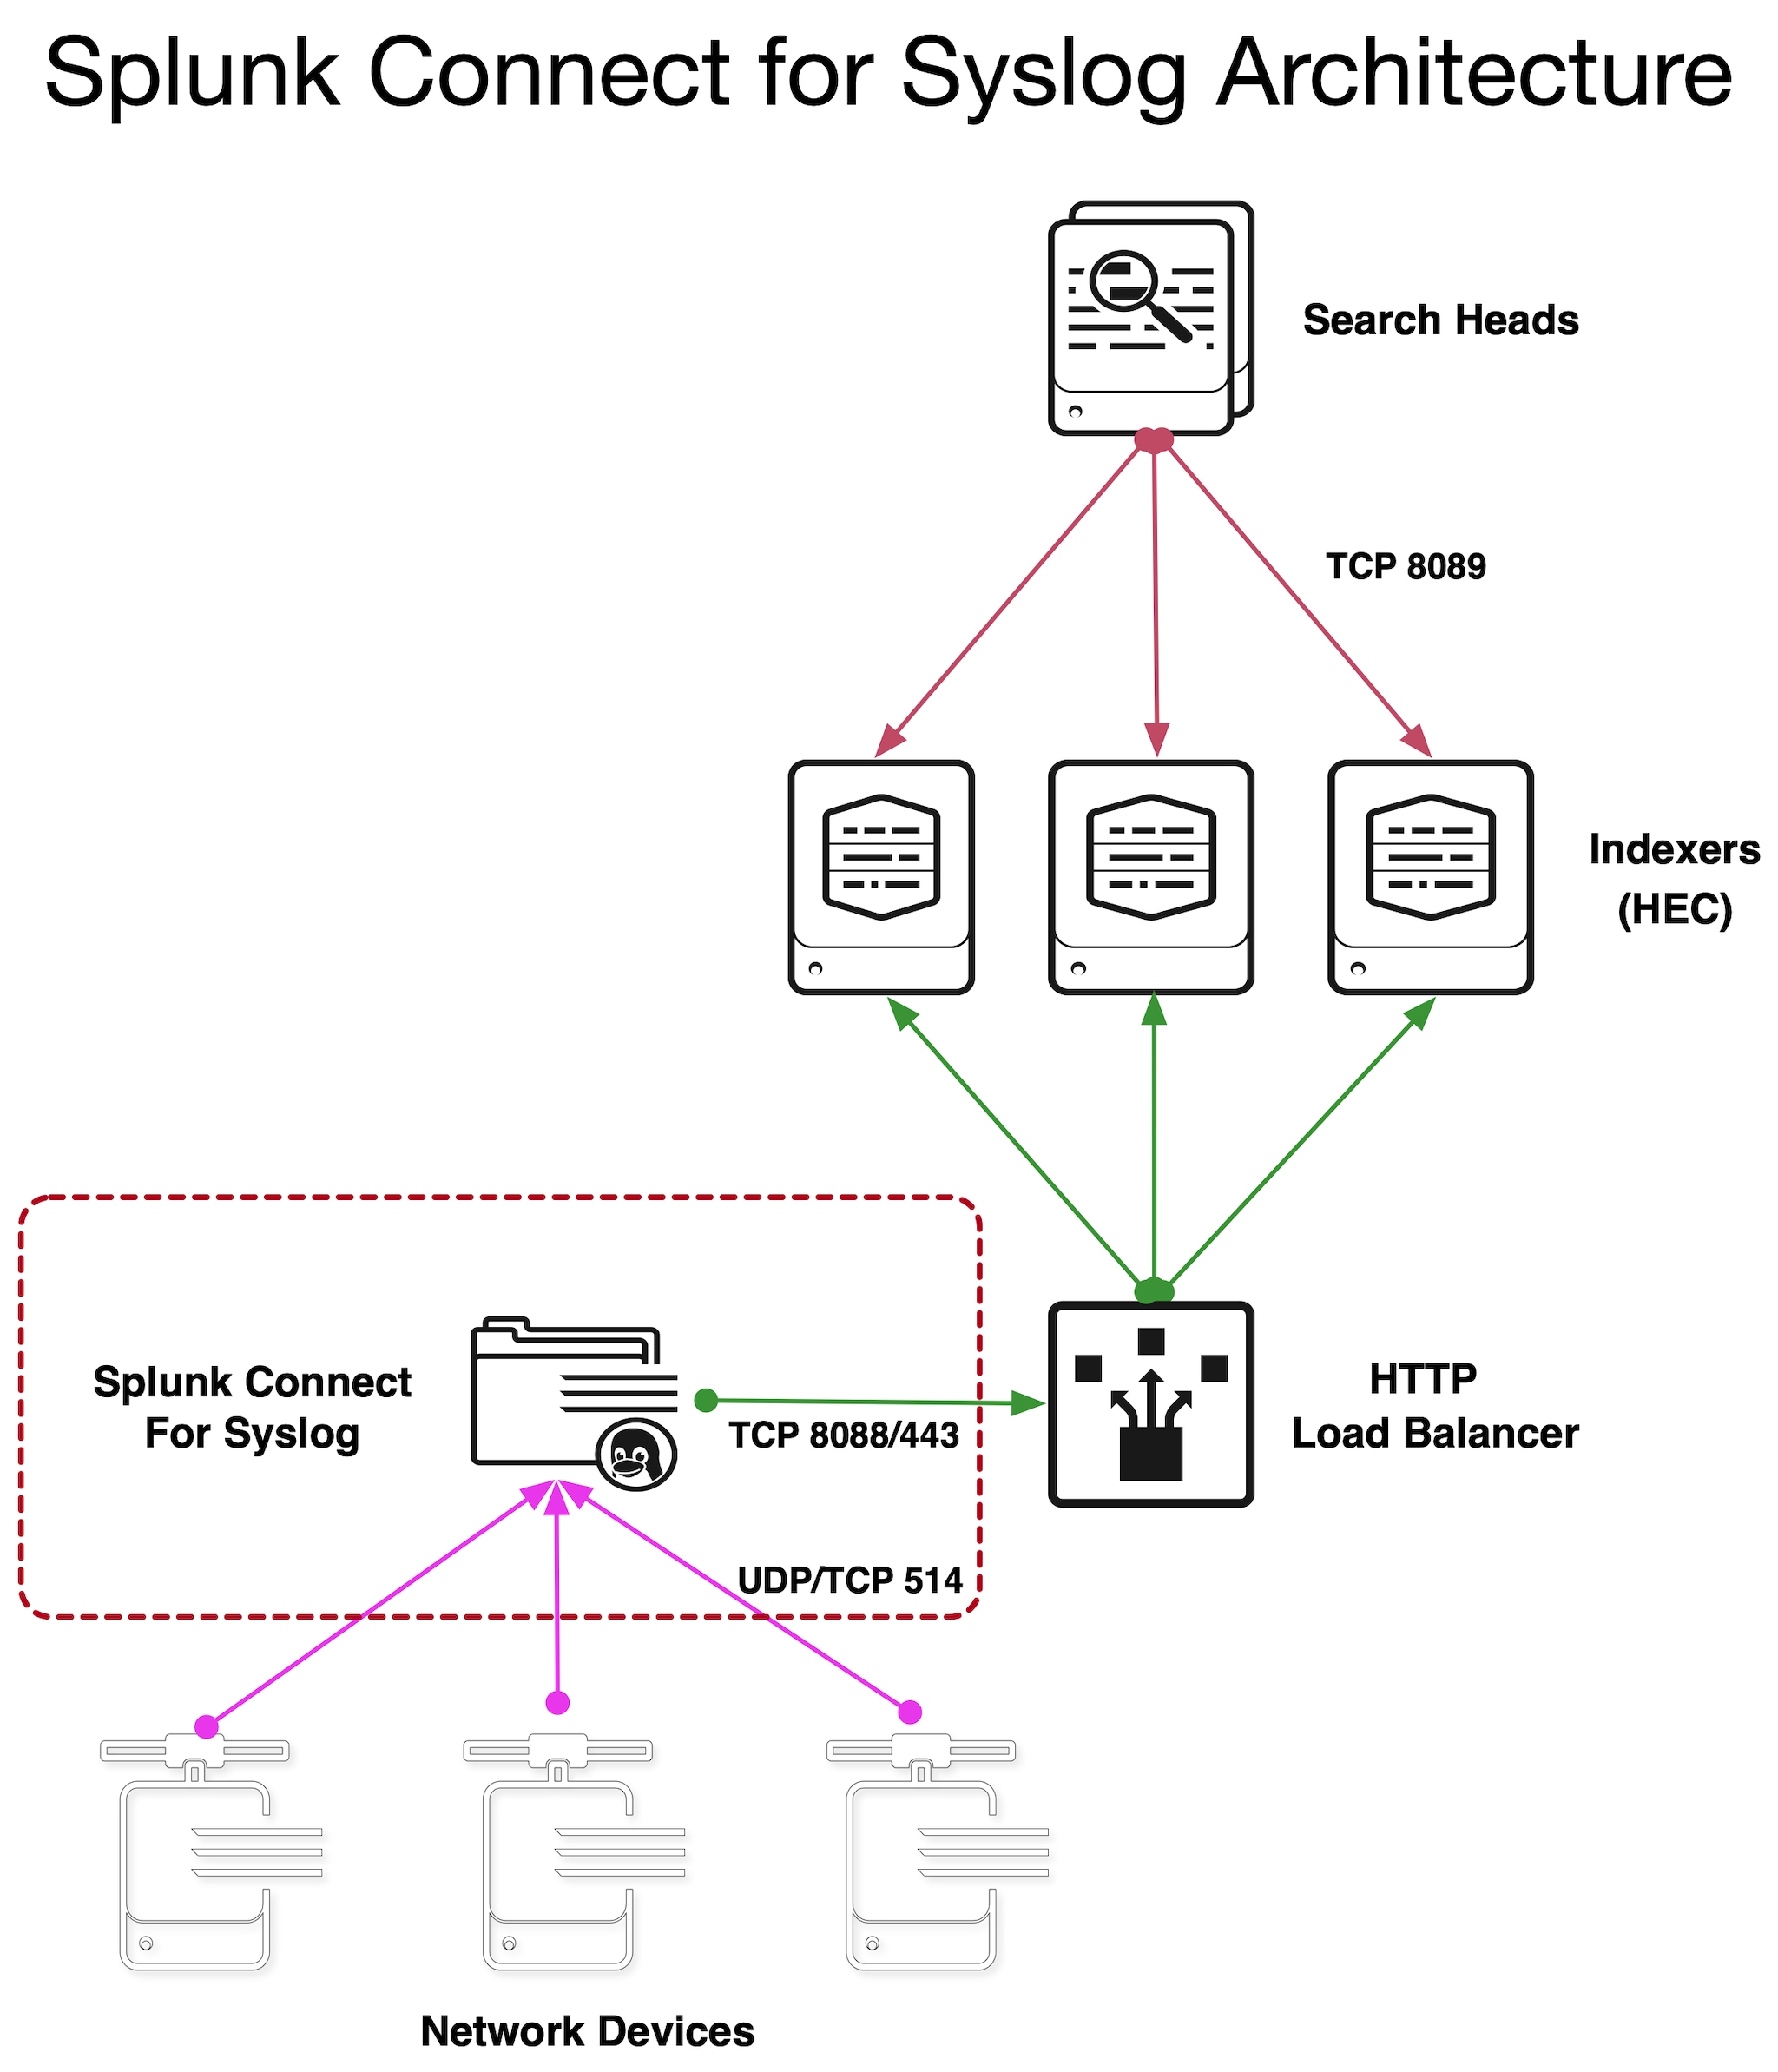 Splunk Connect for Syslog Architecture